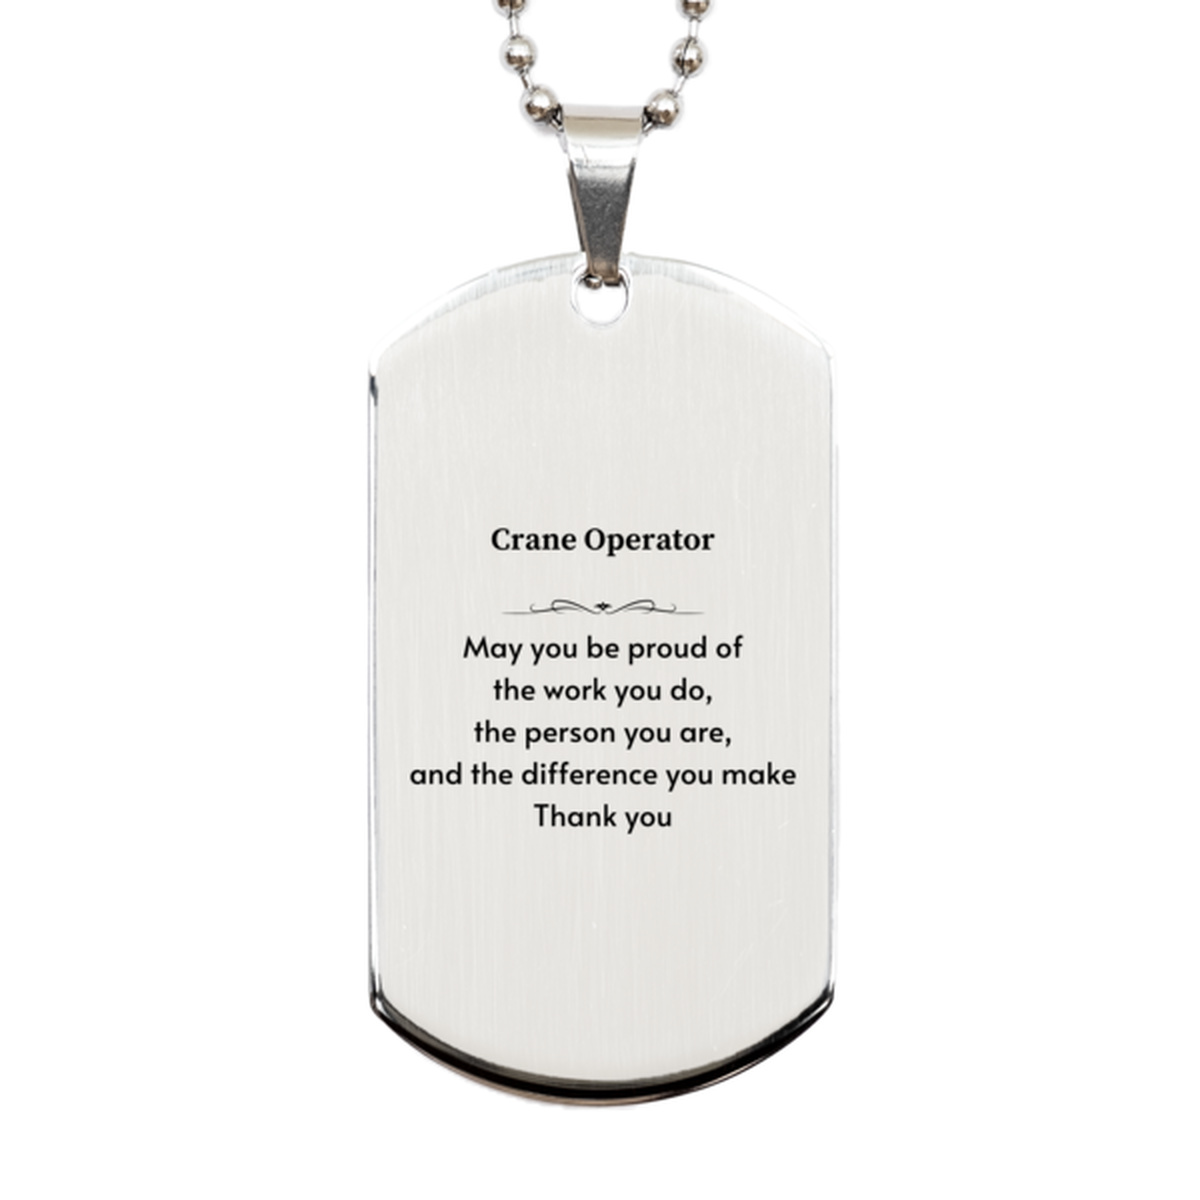 Heartwarming Silver Dog Tag Retirement Coworkers Gifts for Crane Operator, Crane Operator May You be proud of the work you do, the person you are Gifts for Boss Men Women Friends